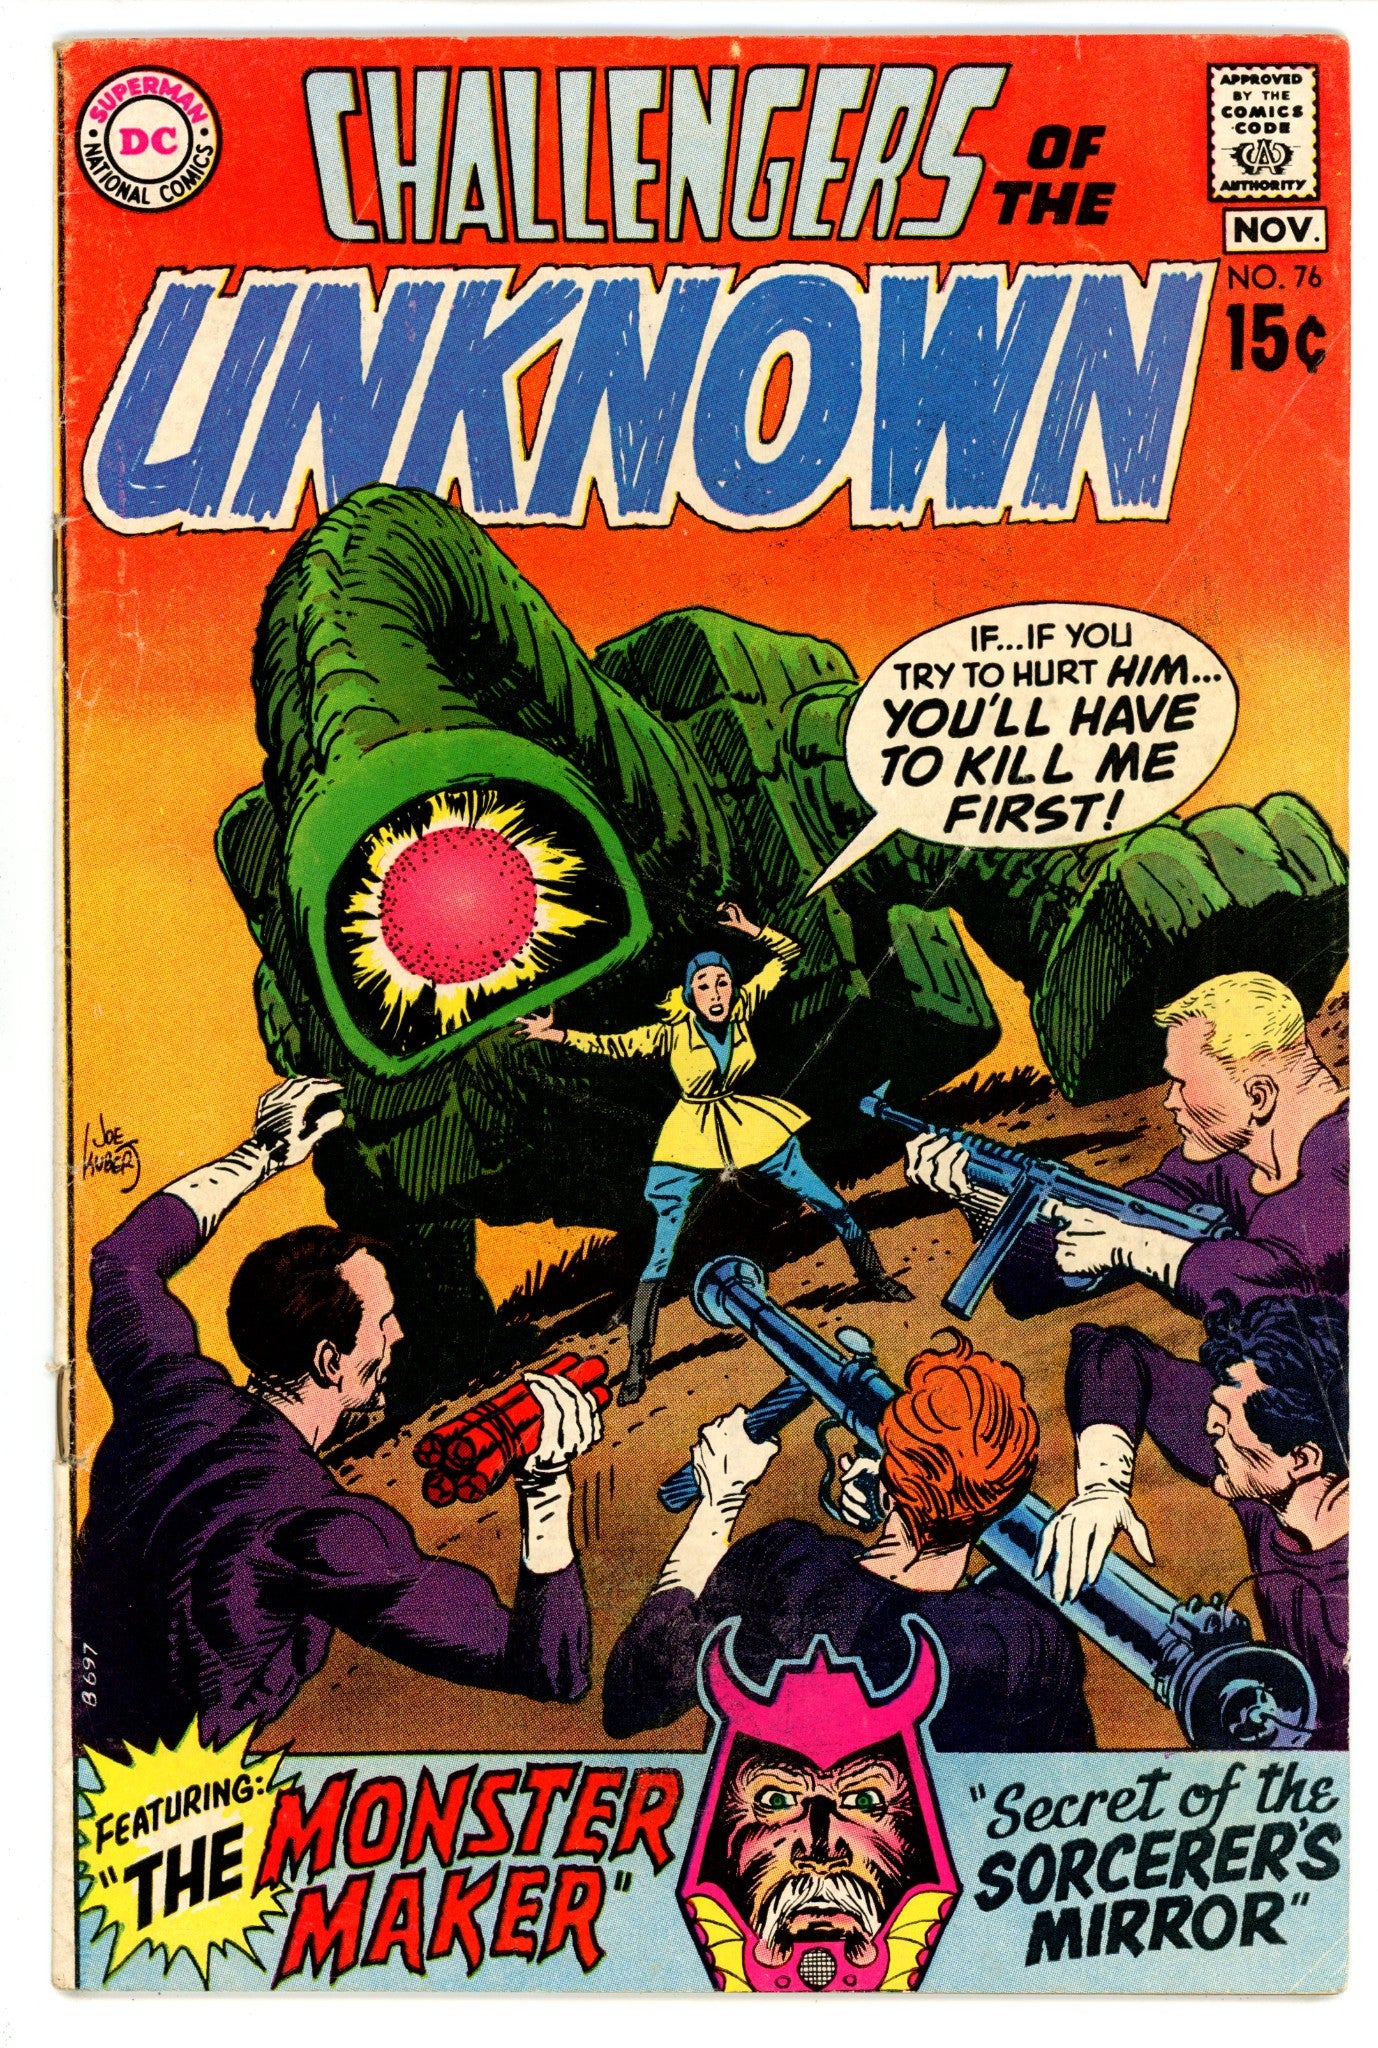 Challengers of the Unknown Vol 1 76 GD/VG (3.0) (1970) 